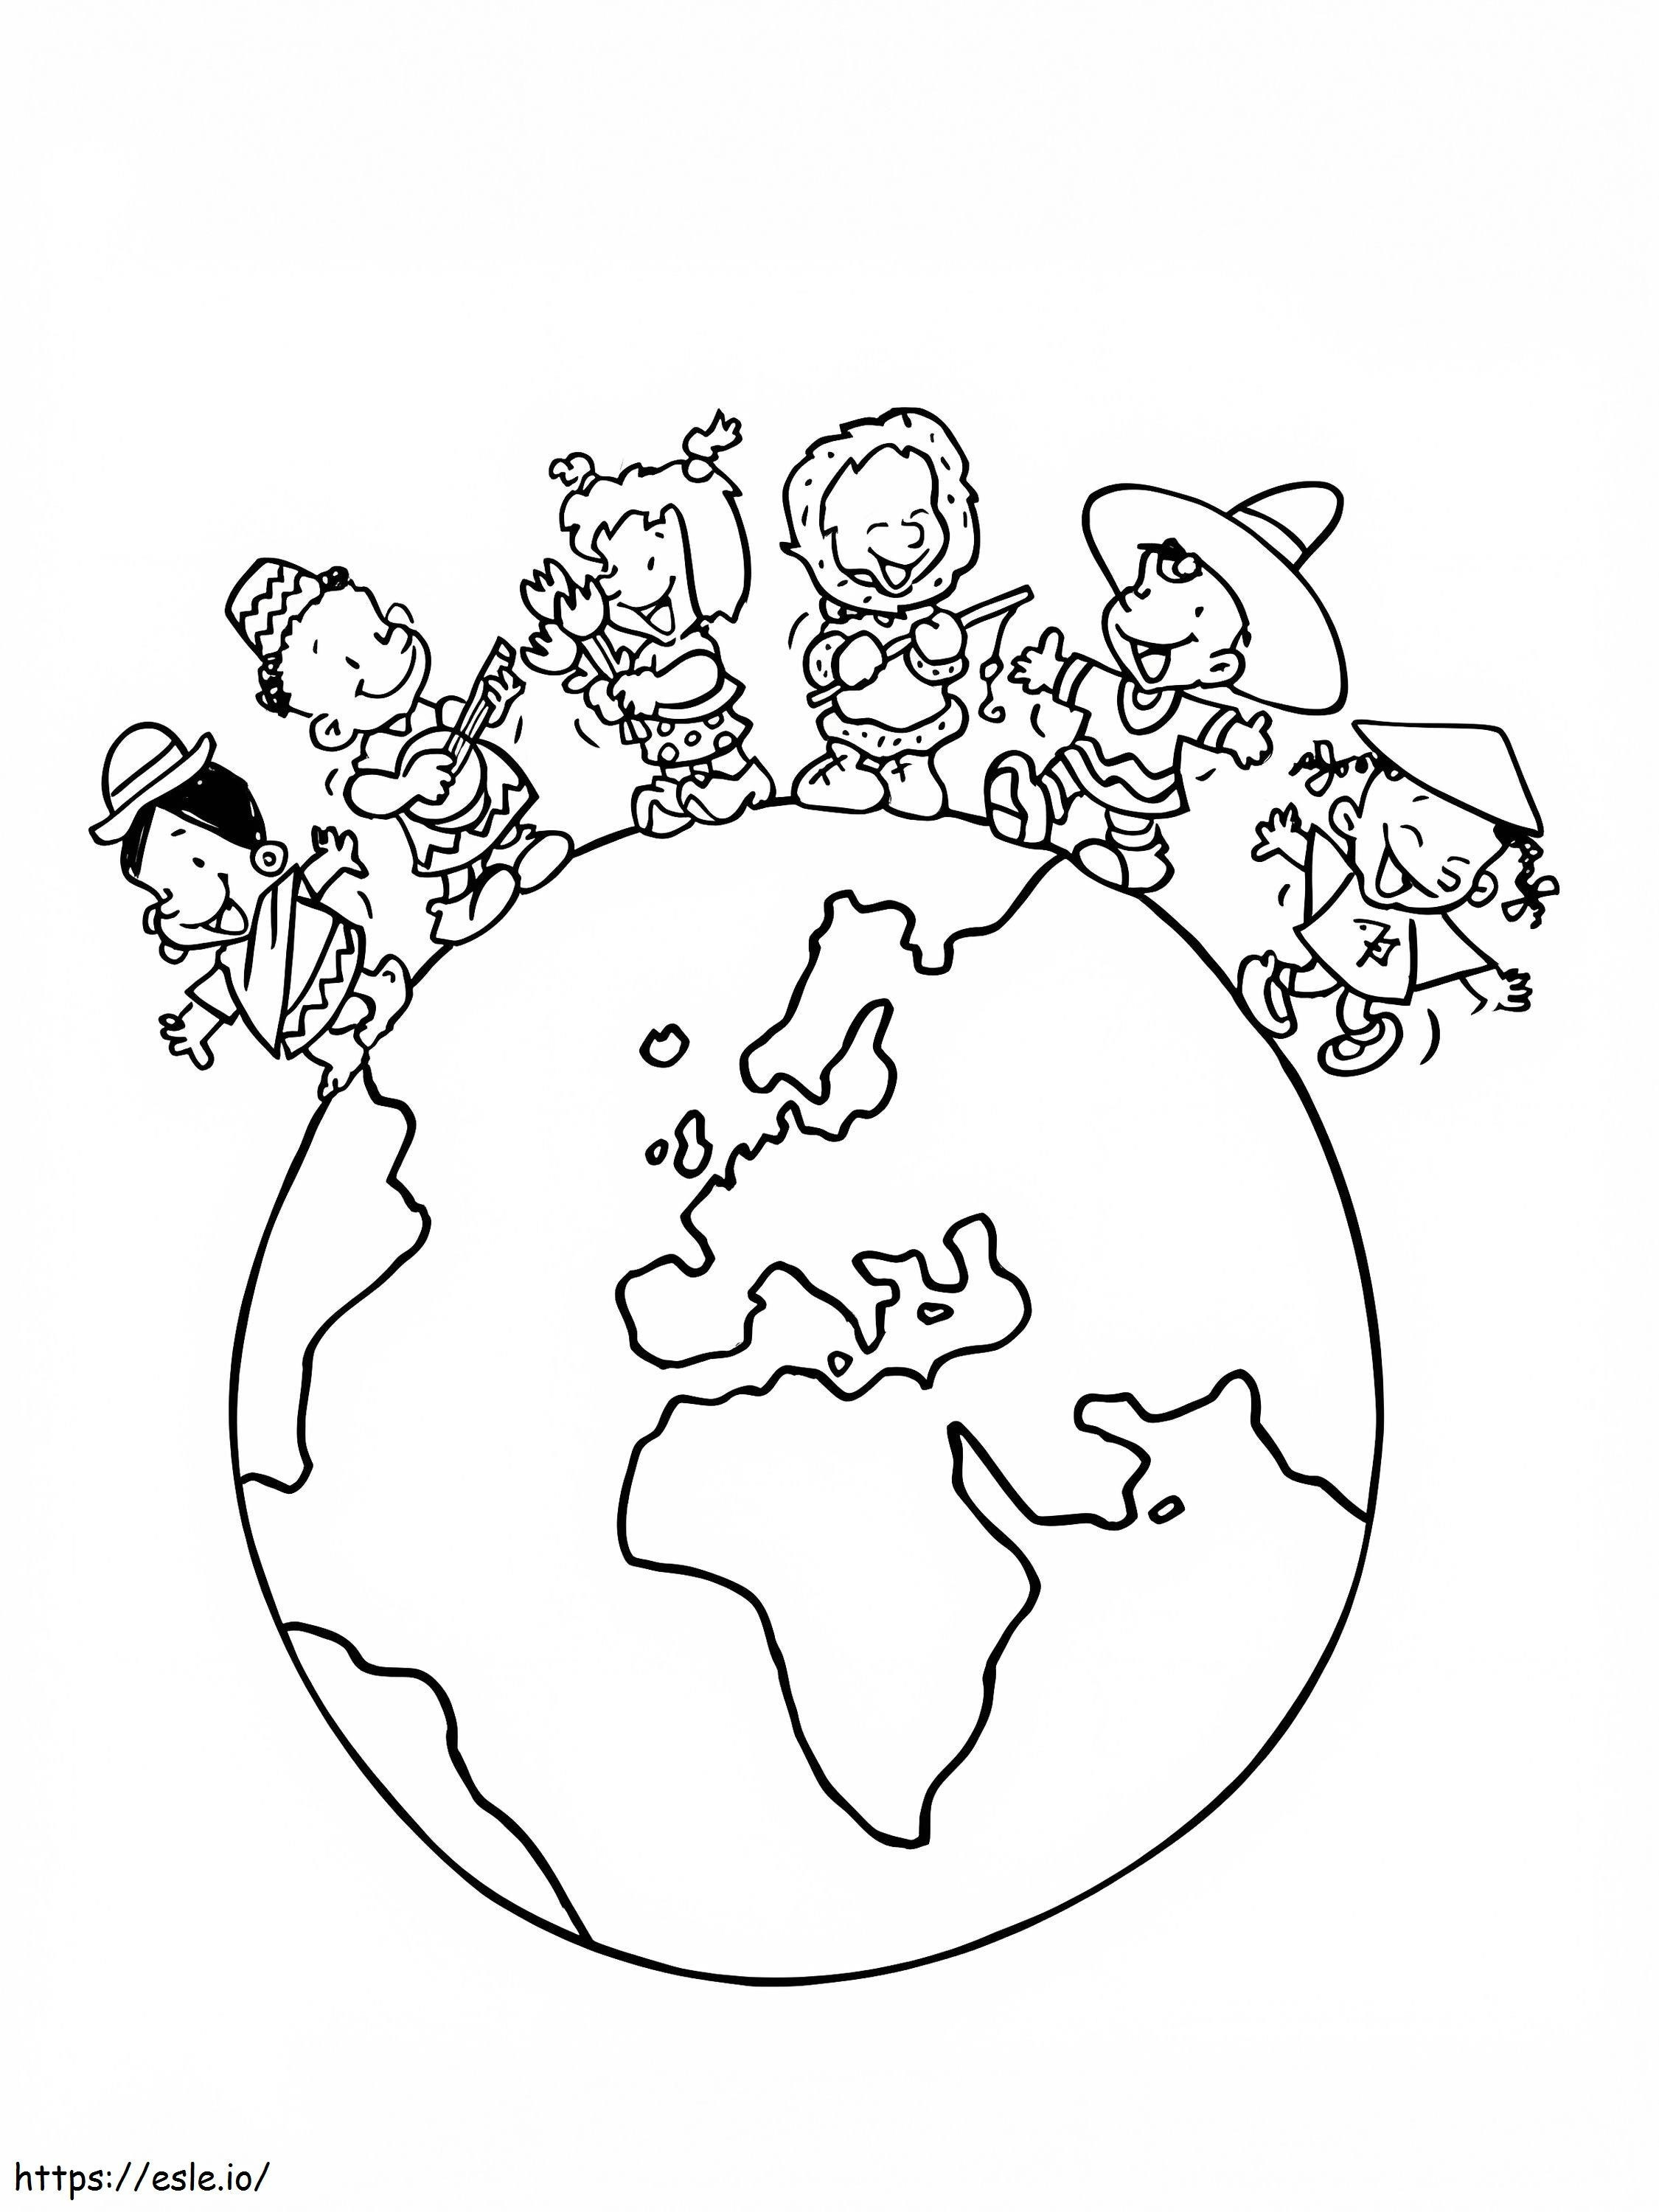 Happy Childrens Day 3 coloring page